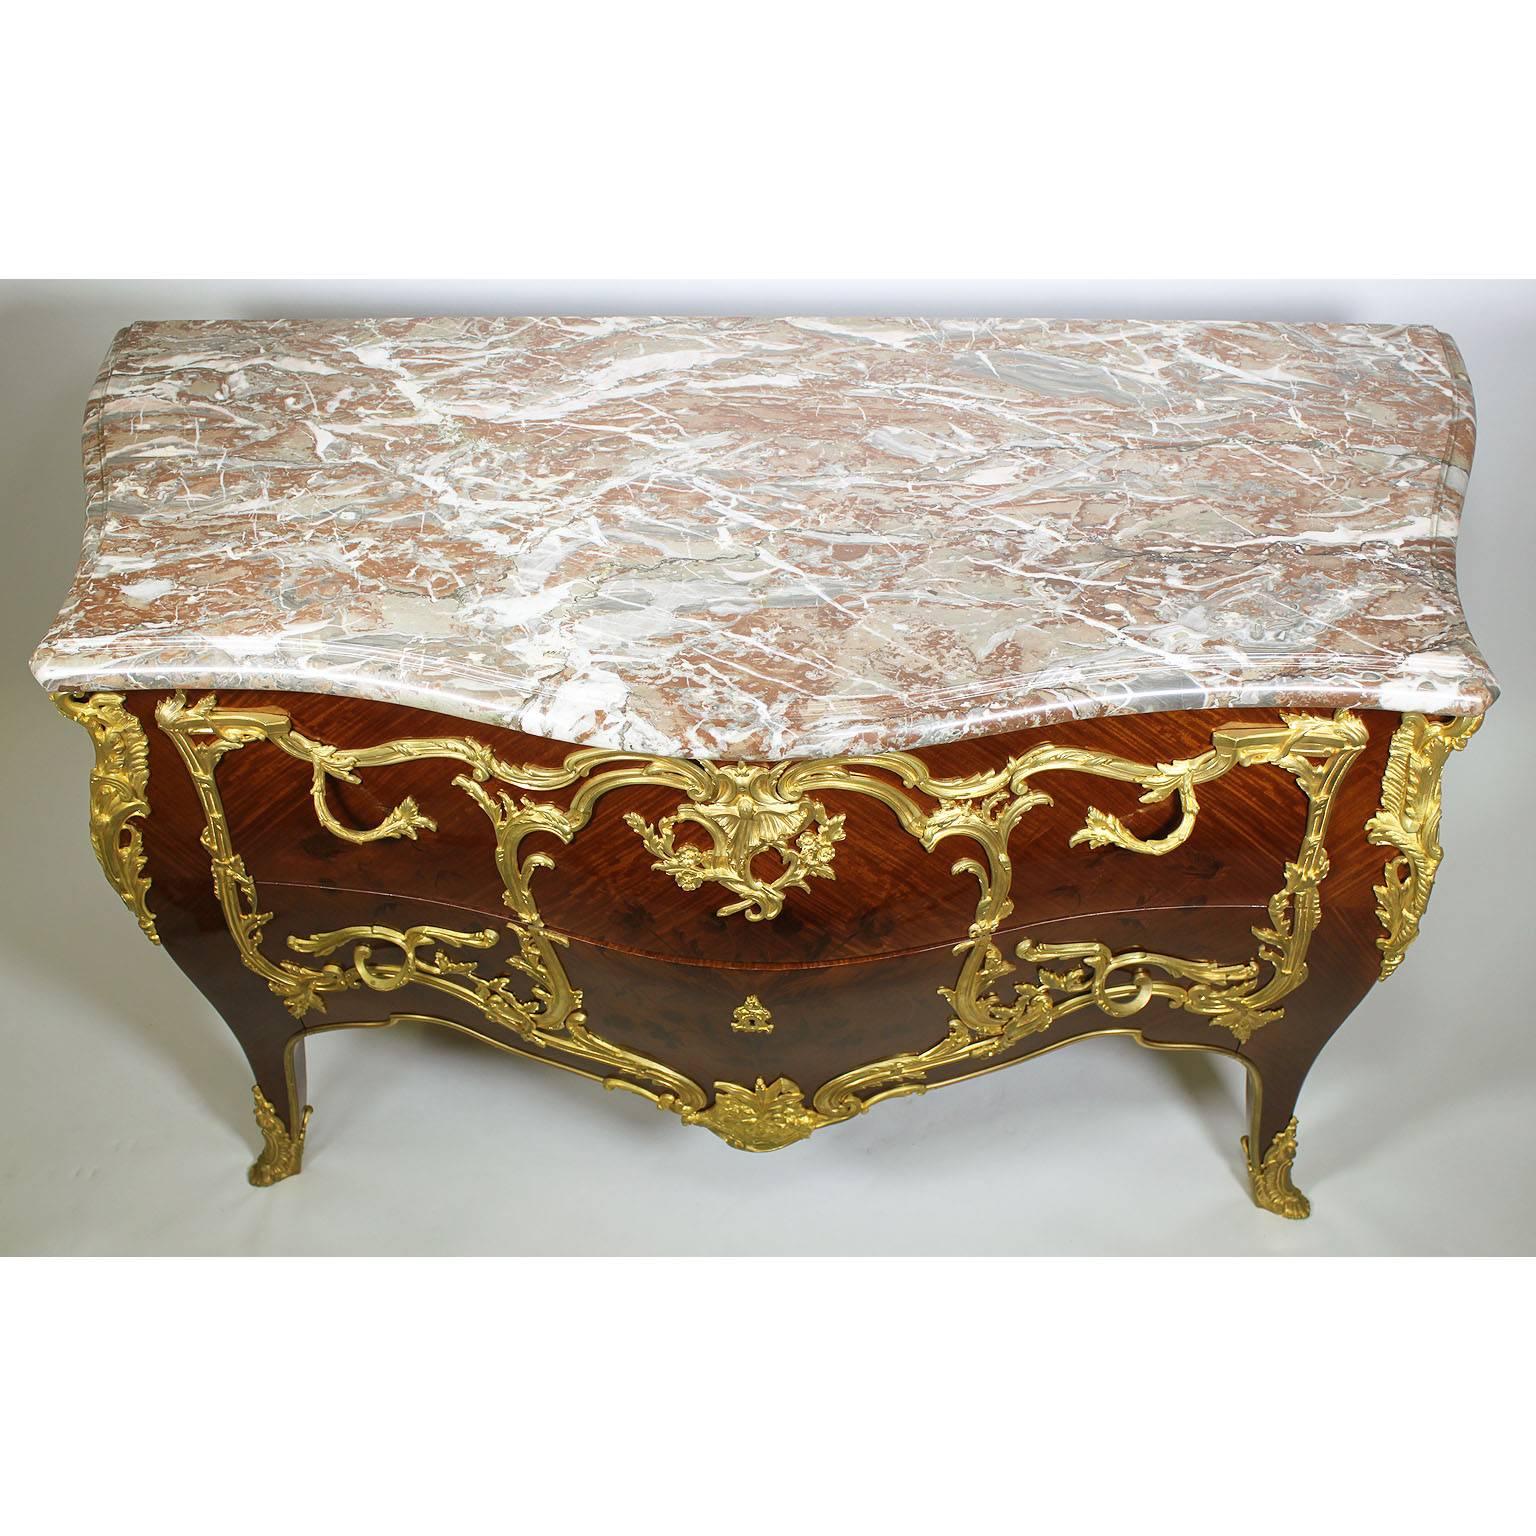 French 19th-20th century Louis XV Style Gilt Bronze Mounted Marquetry Commode For Sale 4